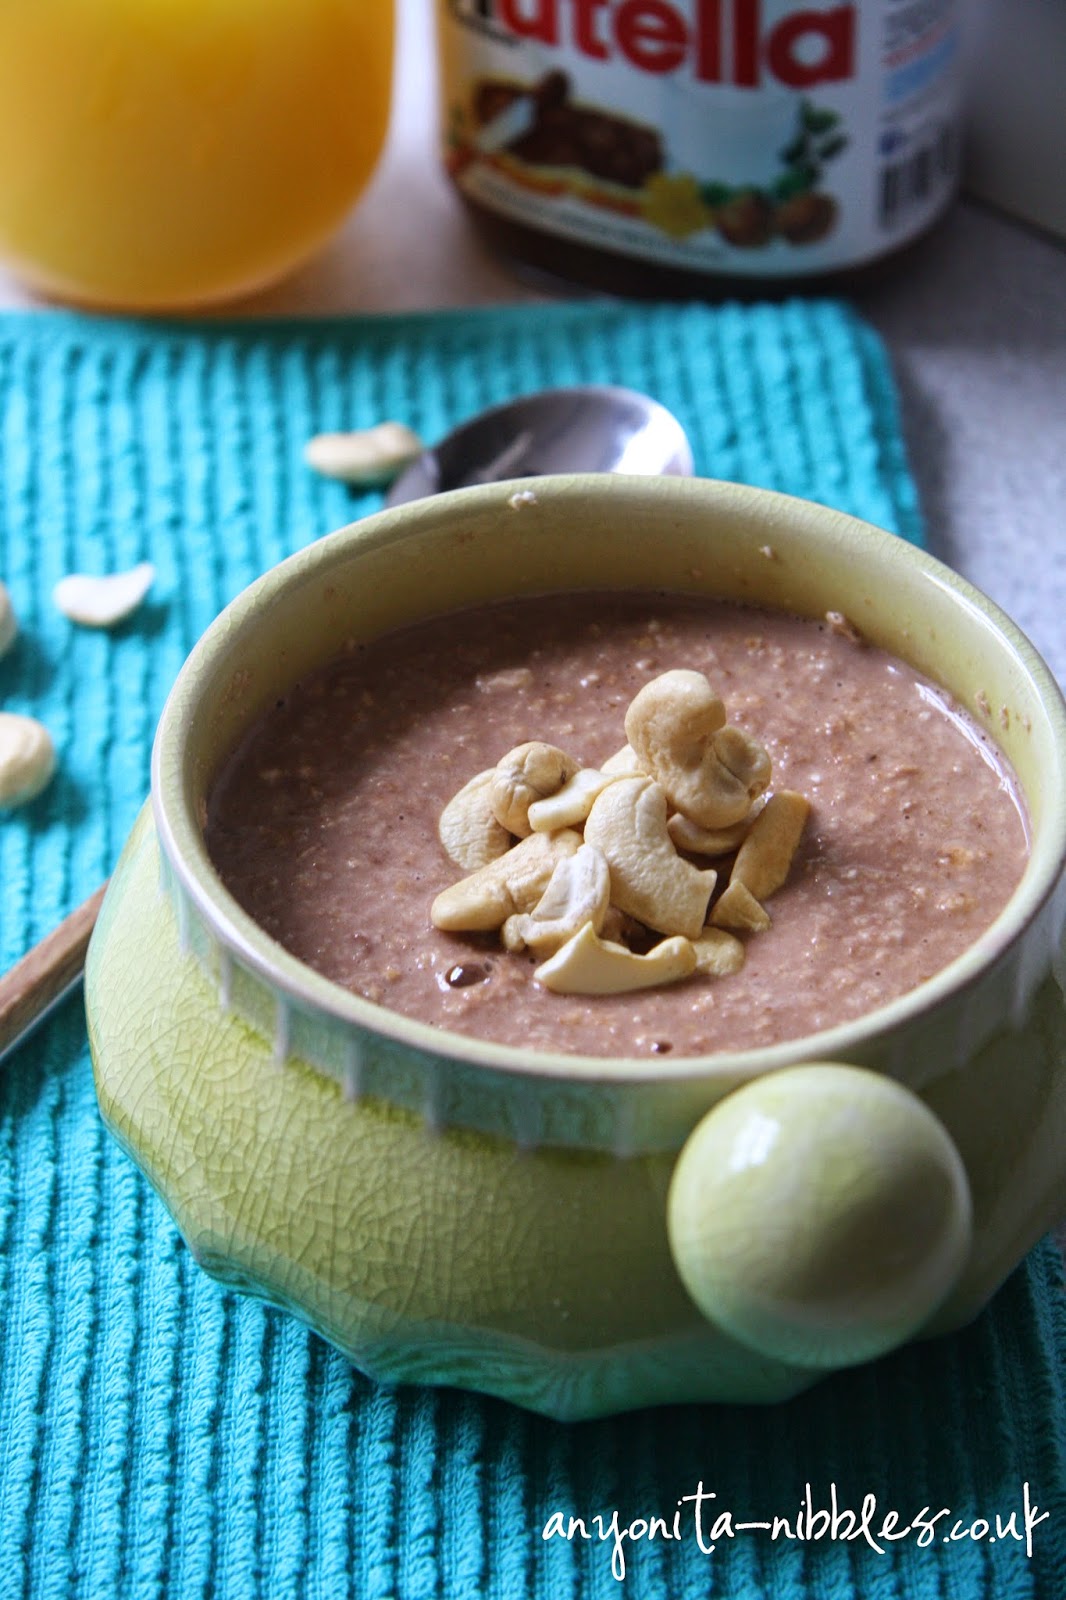 Gluten Free Cashew Nutella Oatmeal from Anyonita-nibbles.co.uk